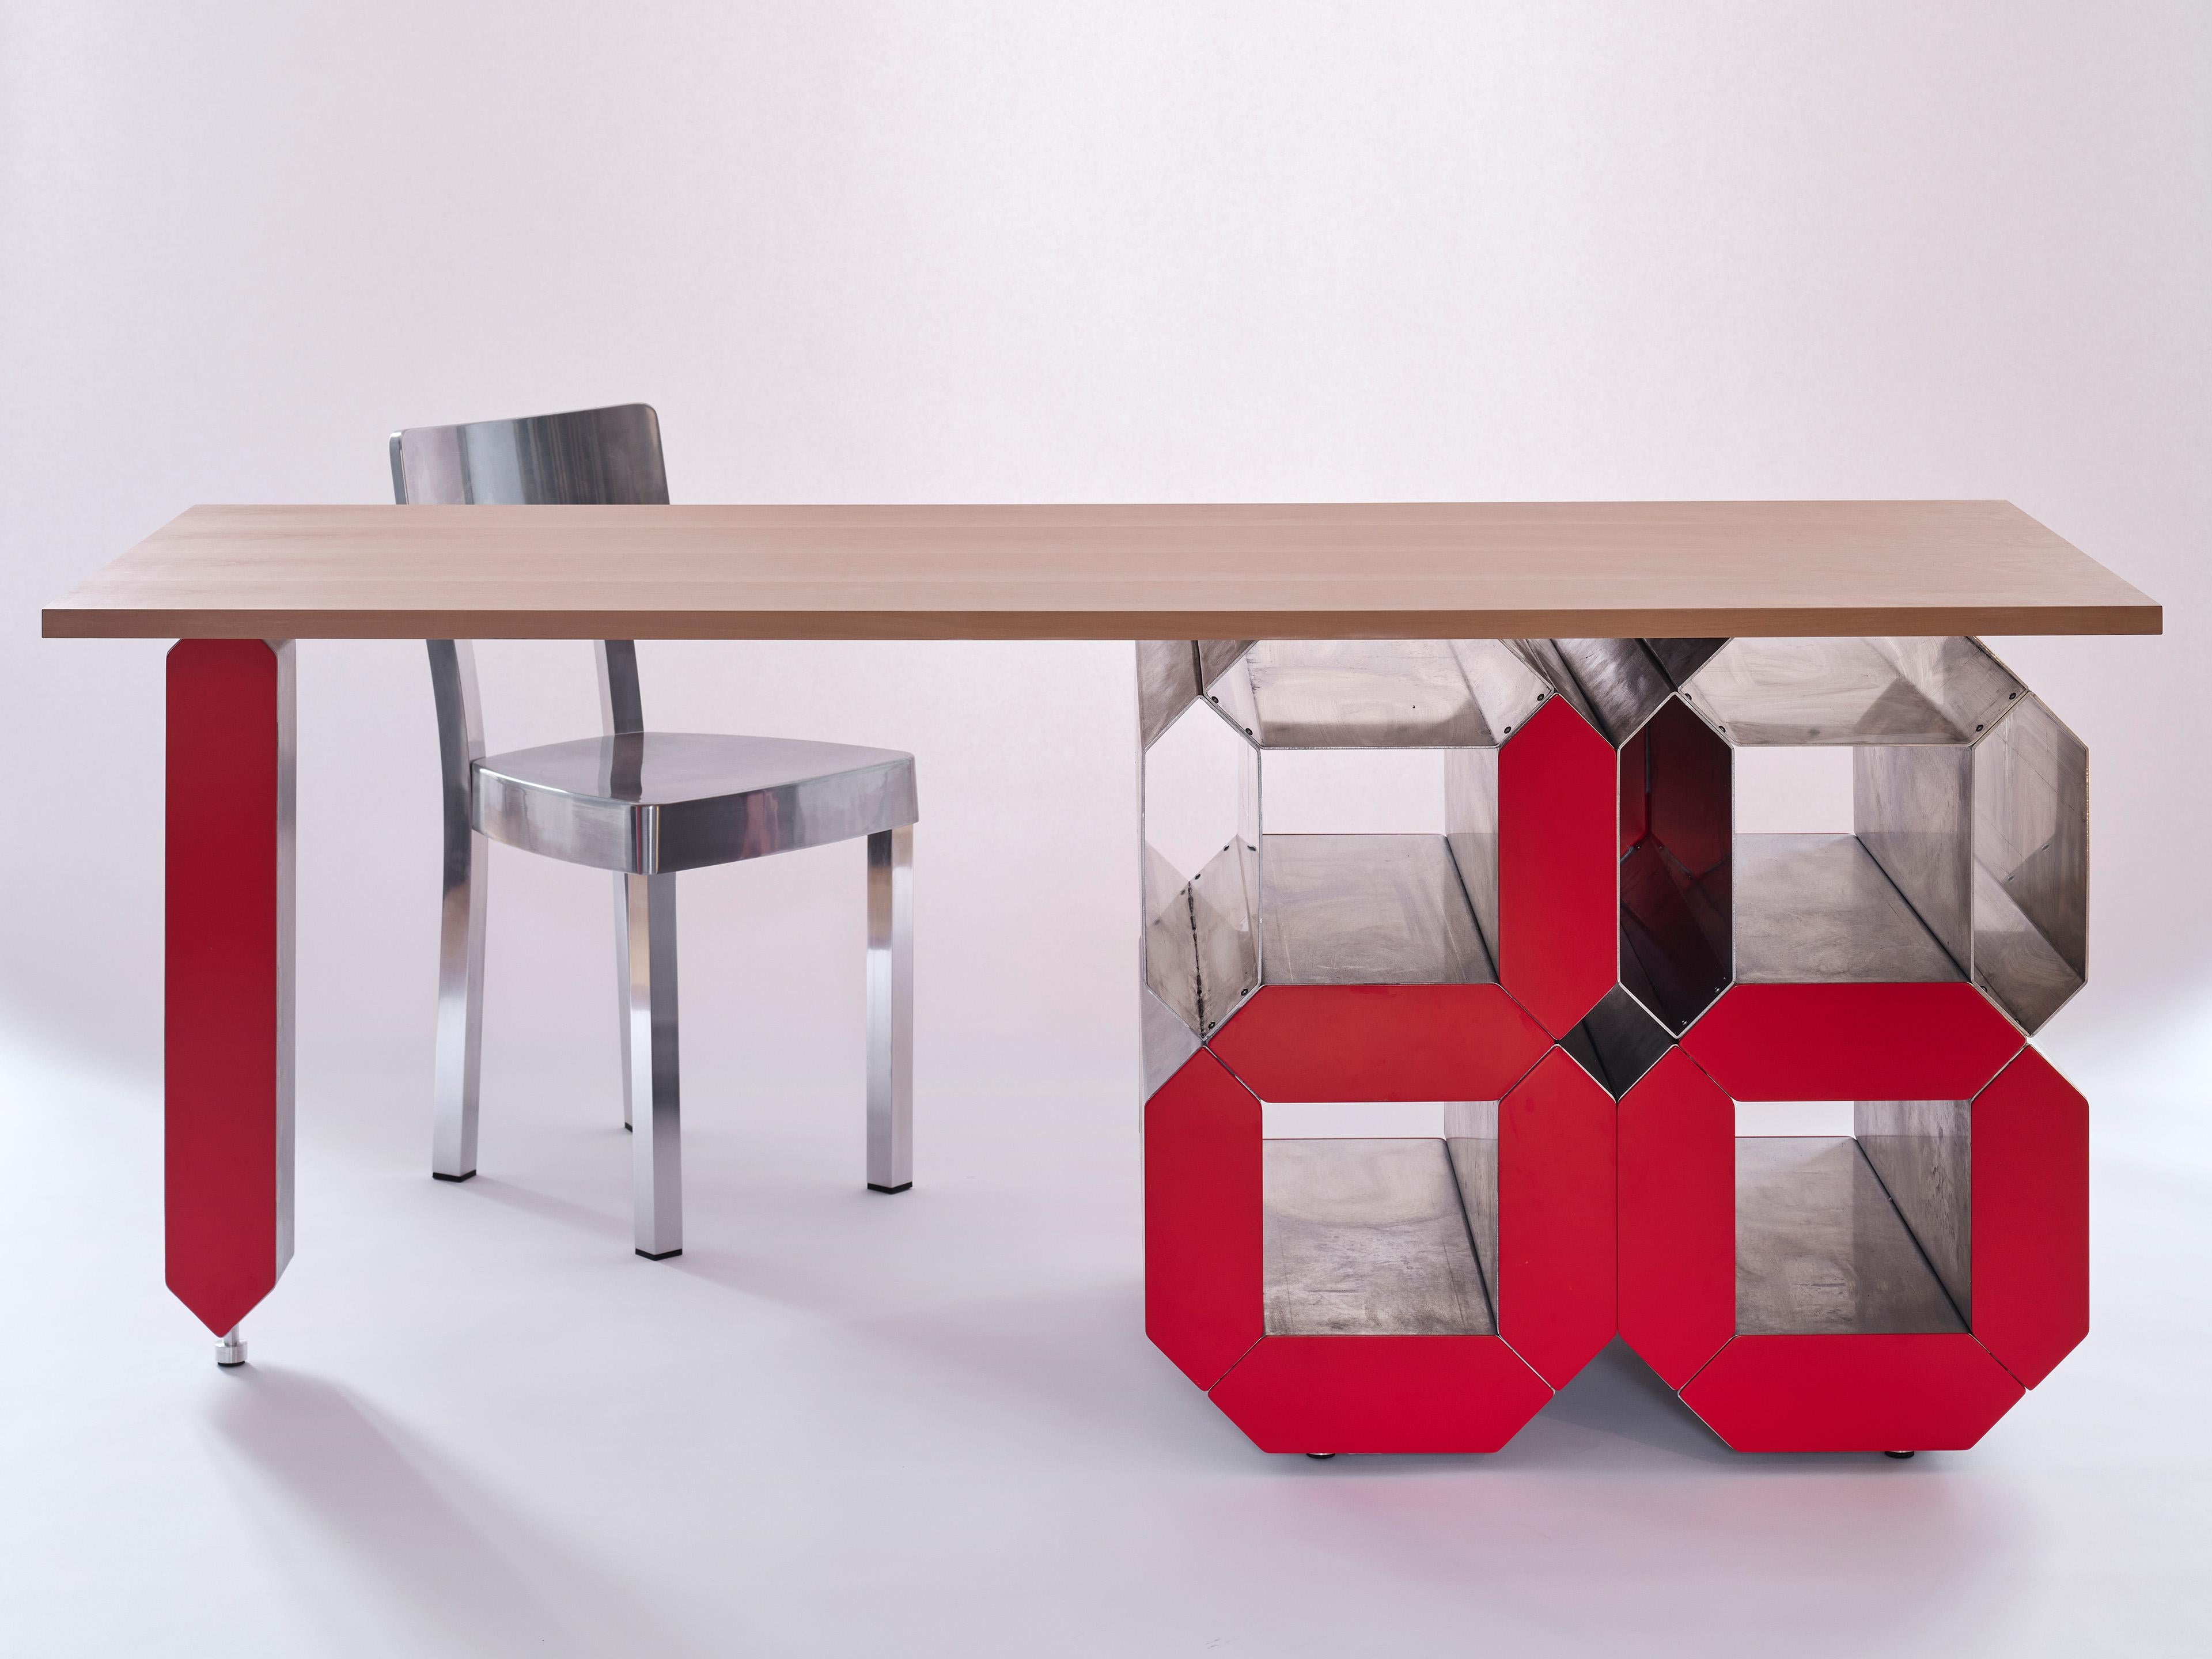 'I do' is a desk made of pear wood and aluminium as part of Alexandre Arrechea and SoShiro’s collaborative Layers collection. It is inspired by the installation CHAOS, which communicates messages in the digital-like lettering often associated with